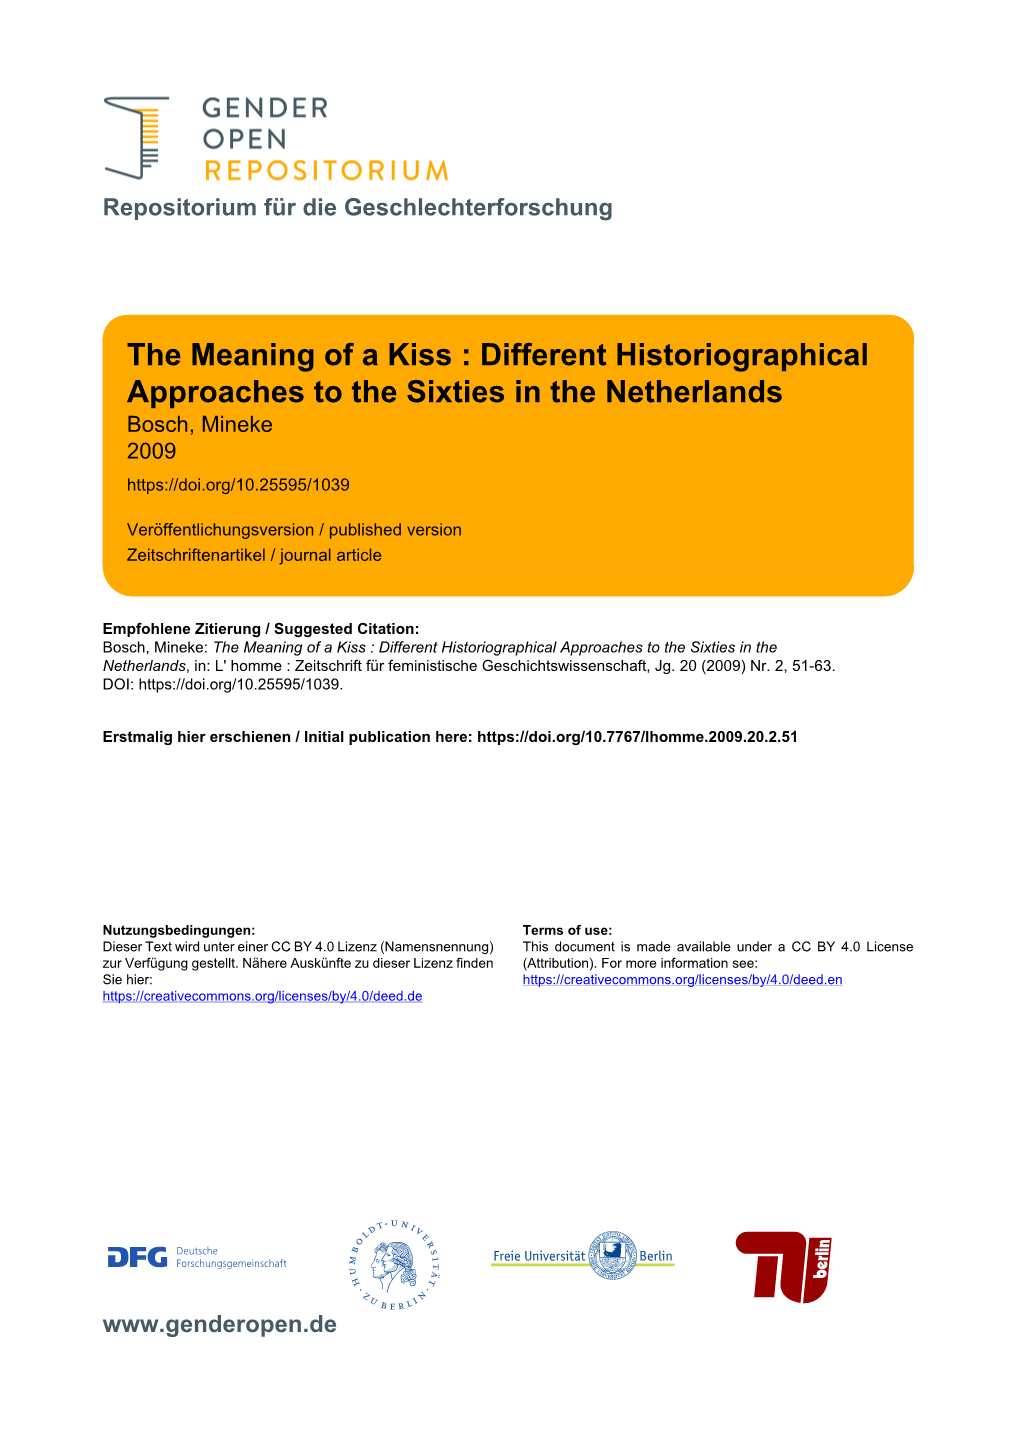 Different Historiographical Approaches to the Sixties in the Netherlands Bosch, Mineke 2009